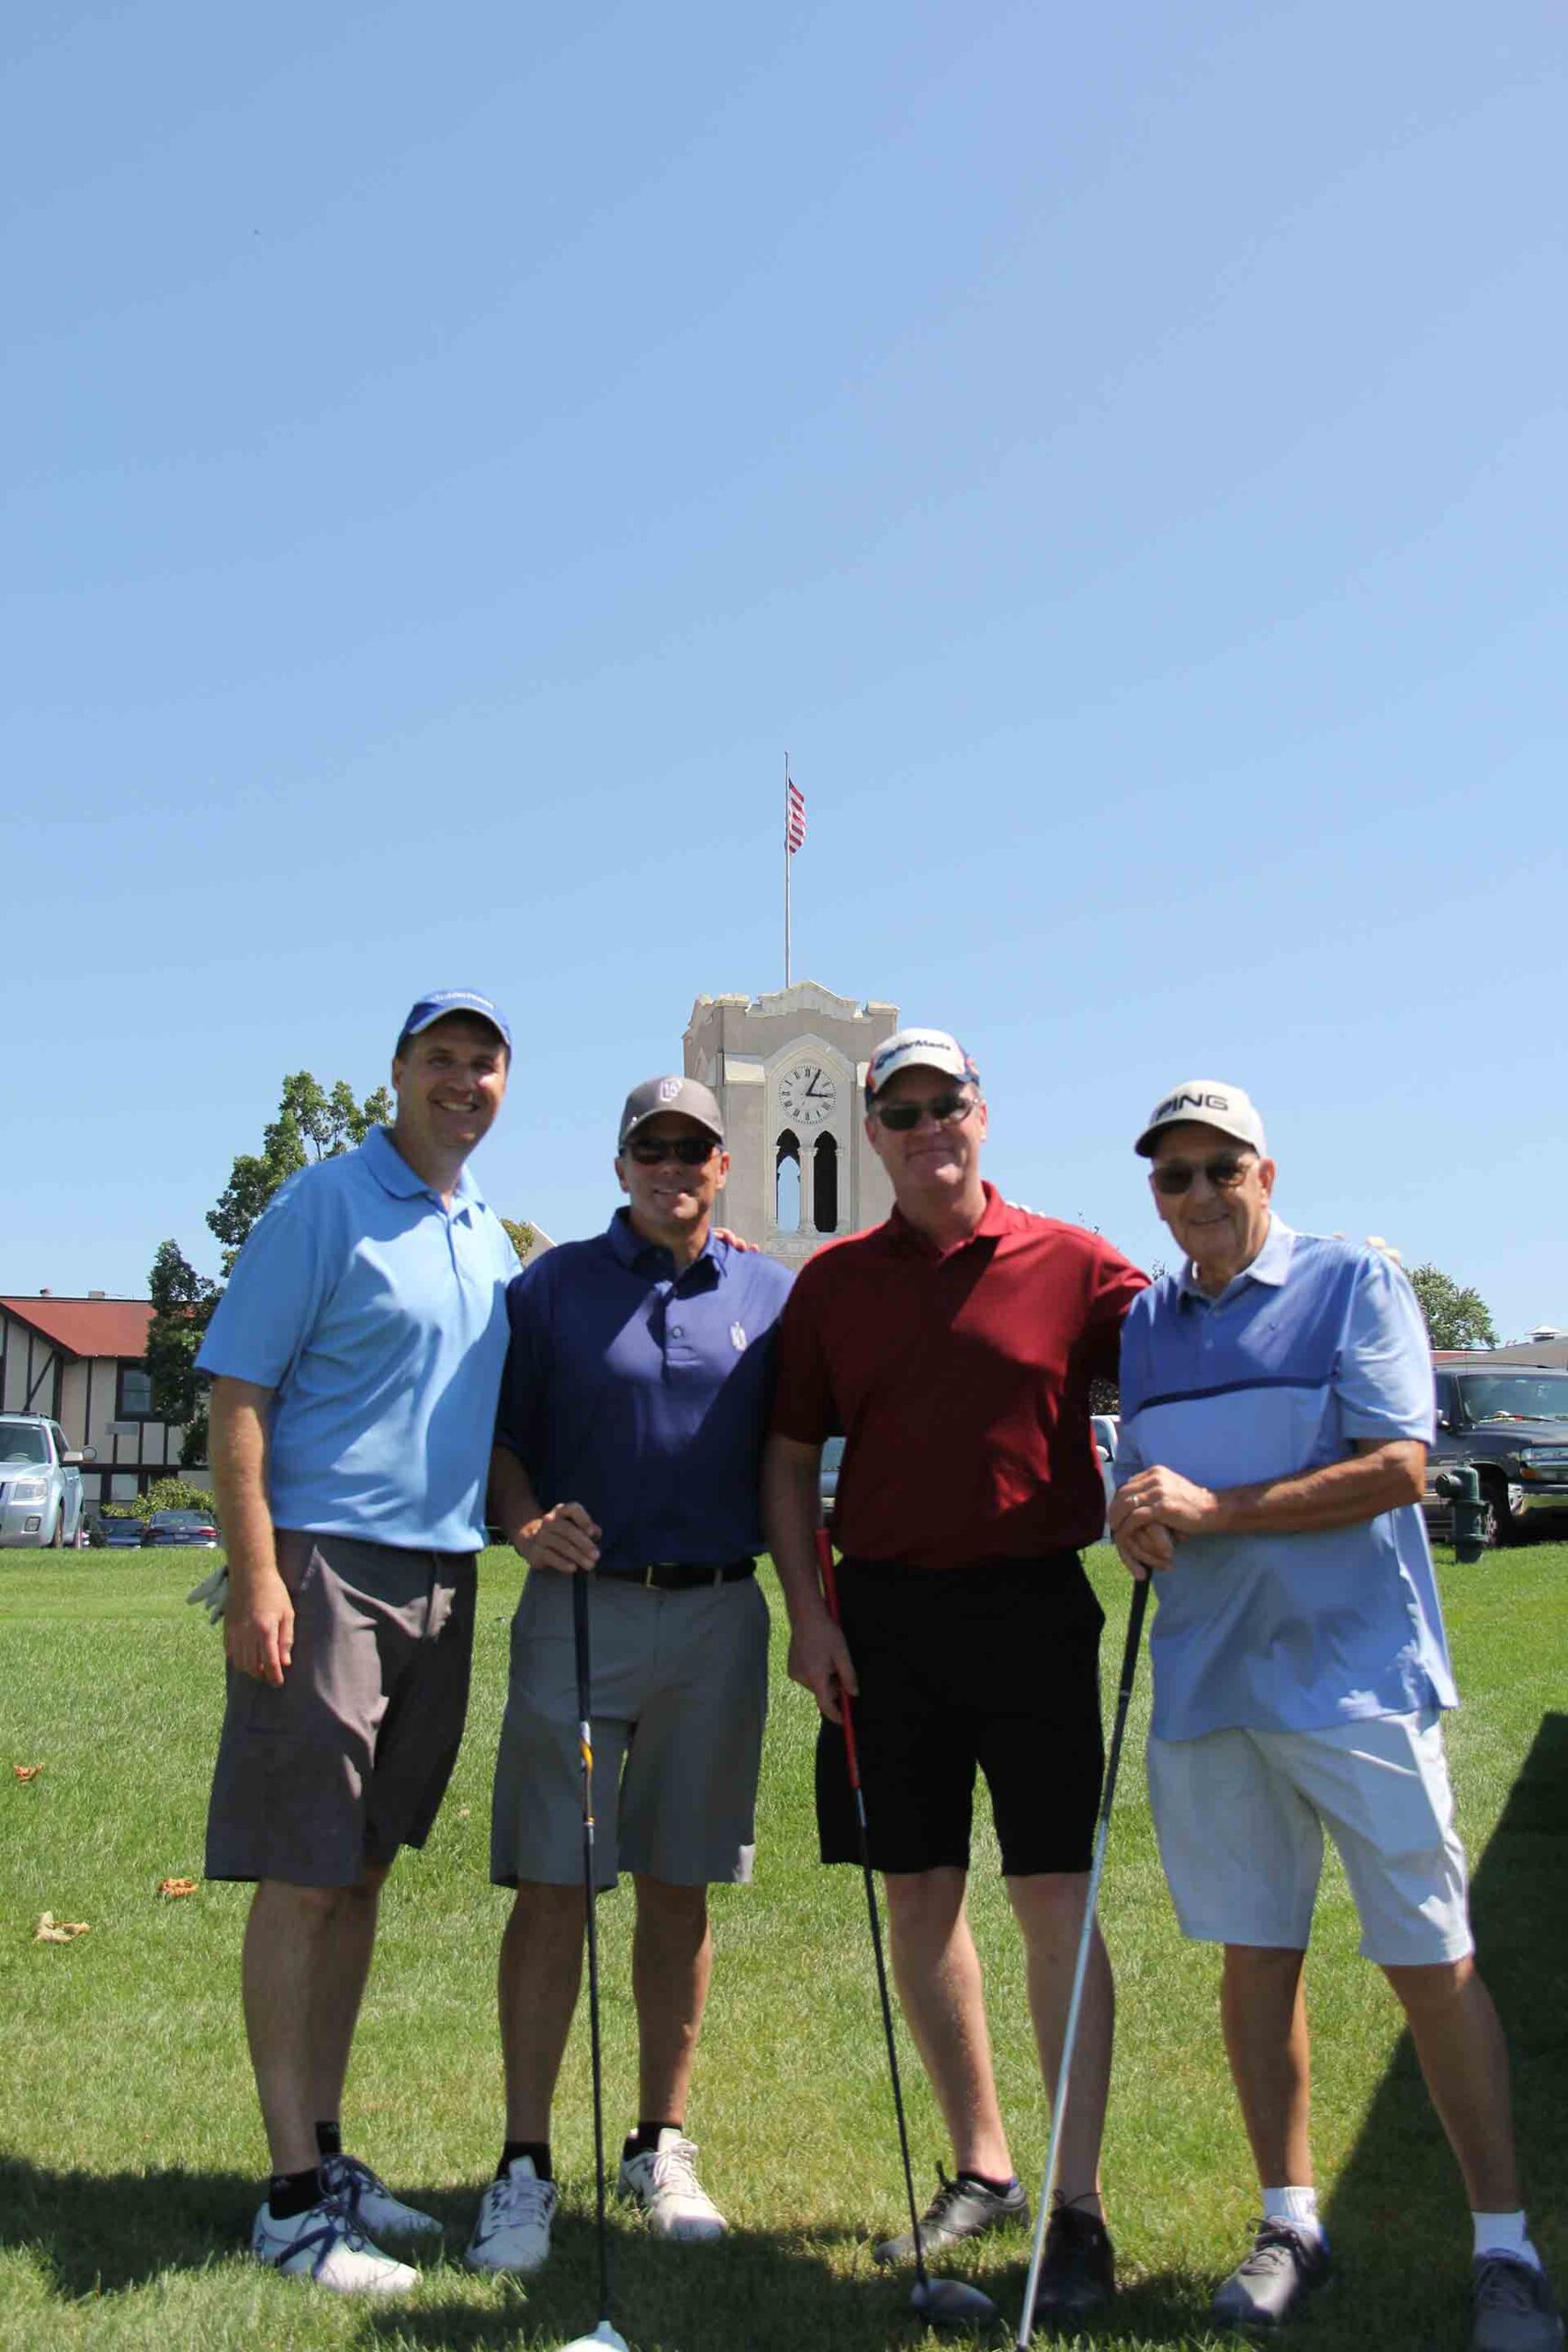 marist-law-association-golf-outing-golfers-staning-in-front-of-clock